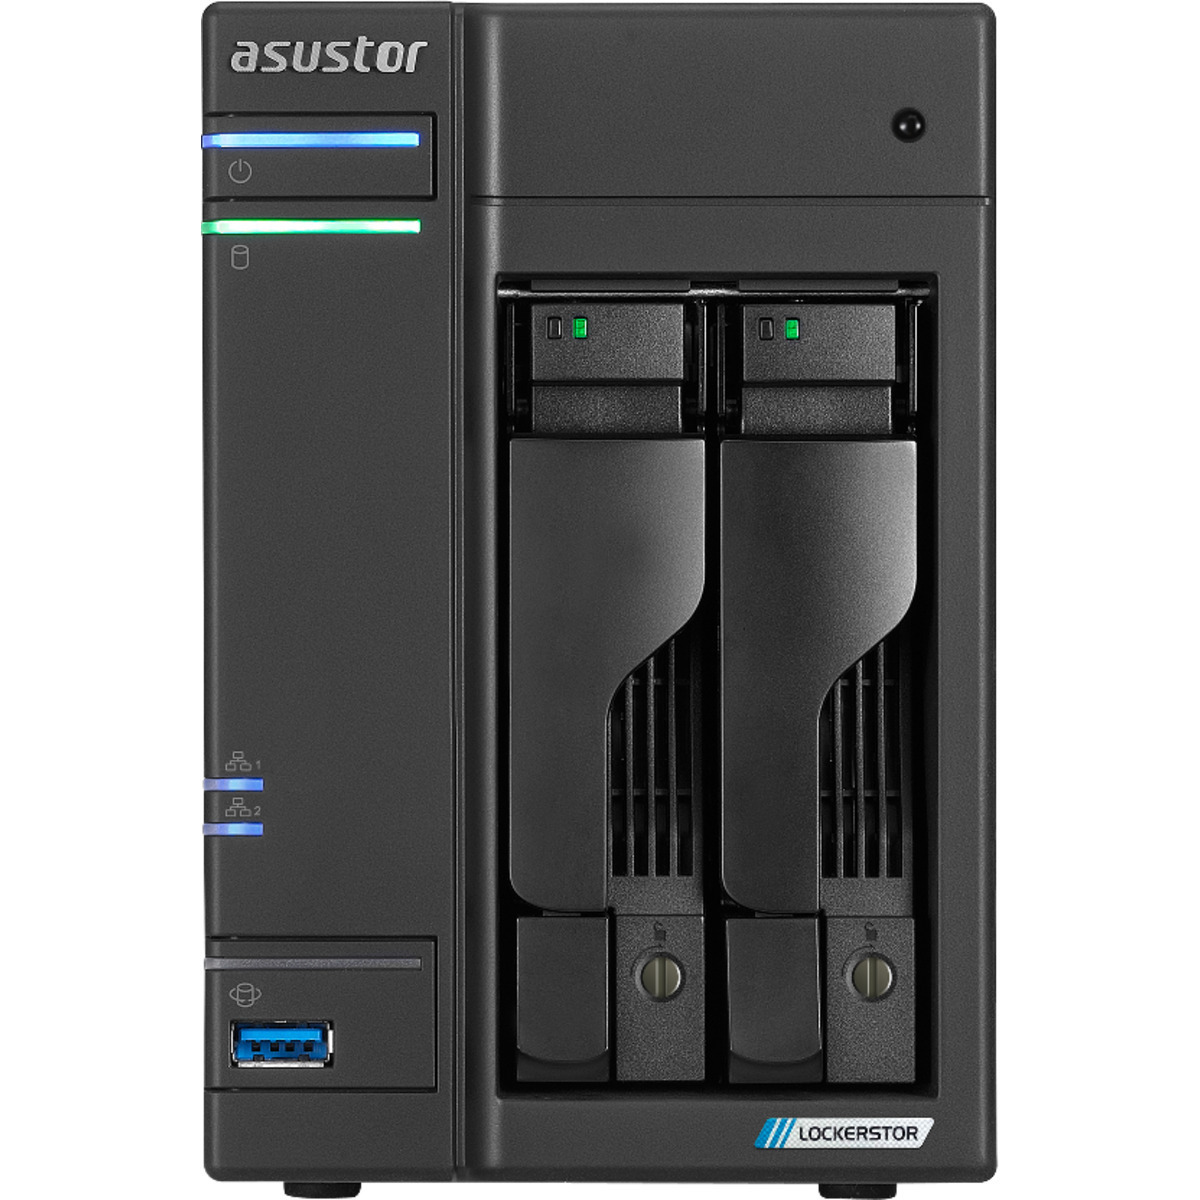 ASUSTOR LOCKERSTOR 2 Gen2 AS6702T 40tb 2-Bay Desktop Multimedia / Power User / Business NAS - Network Attached Storage Device 2x20tb Seagate EXOS X20 ST20000NM007D 3.5 7200rpm SATA 6Gb/s HDD ENTERPRISE Class Drives Installed - Burn-In Tested - FREE RAM UPGRADE LOCKERSTOR 2 Gen2 AS6702T